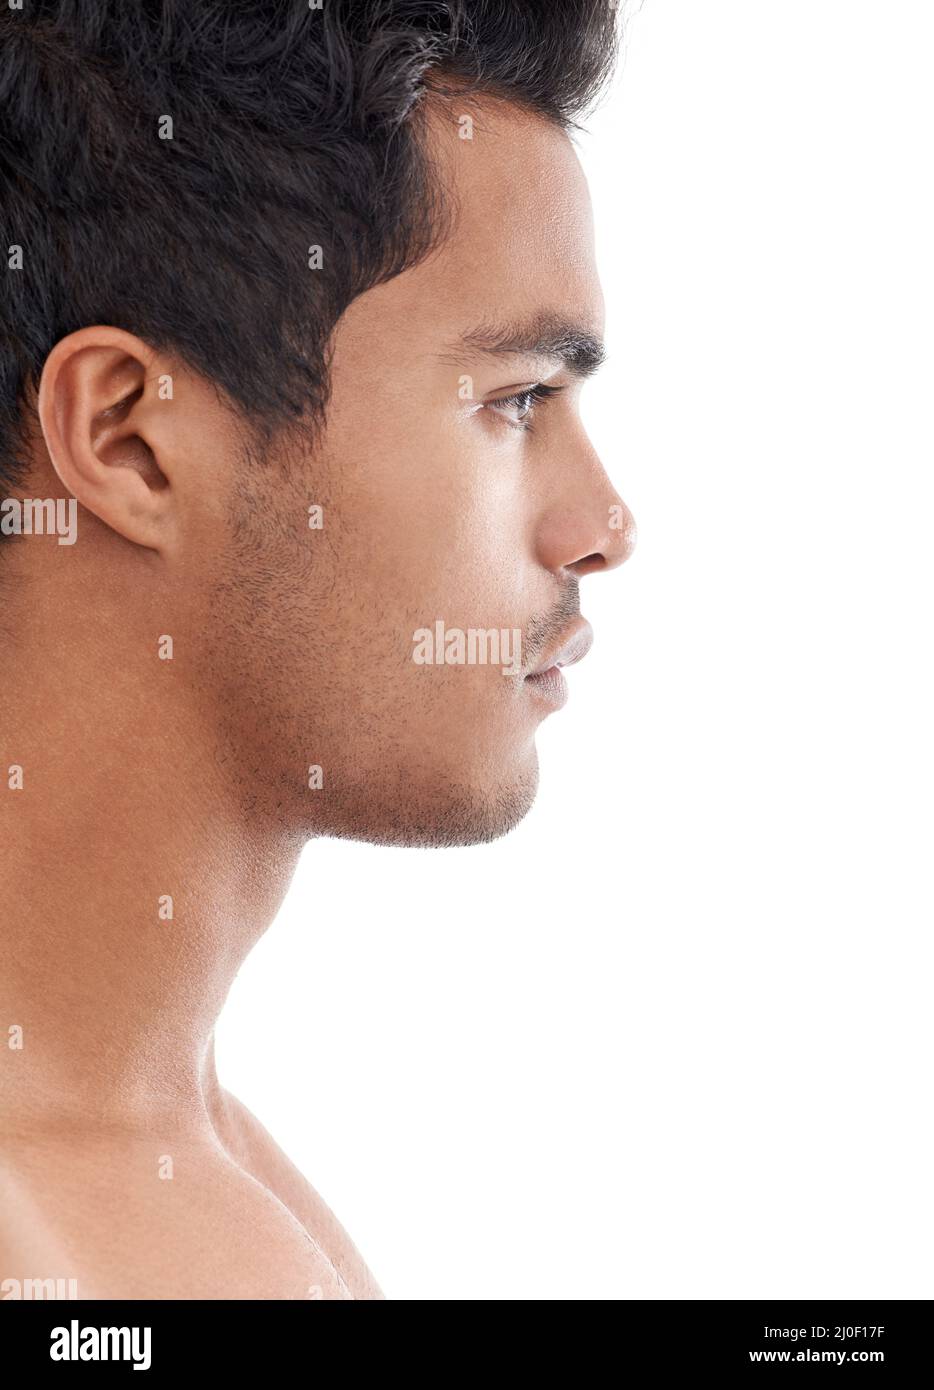 Serious profile. Profile shot of a handsome young man isolated on white. Stock Photo